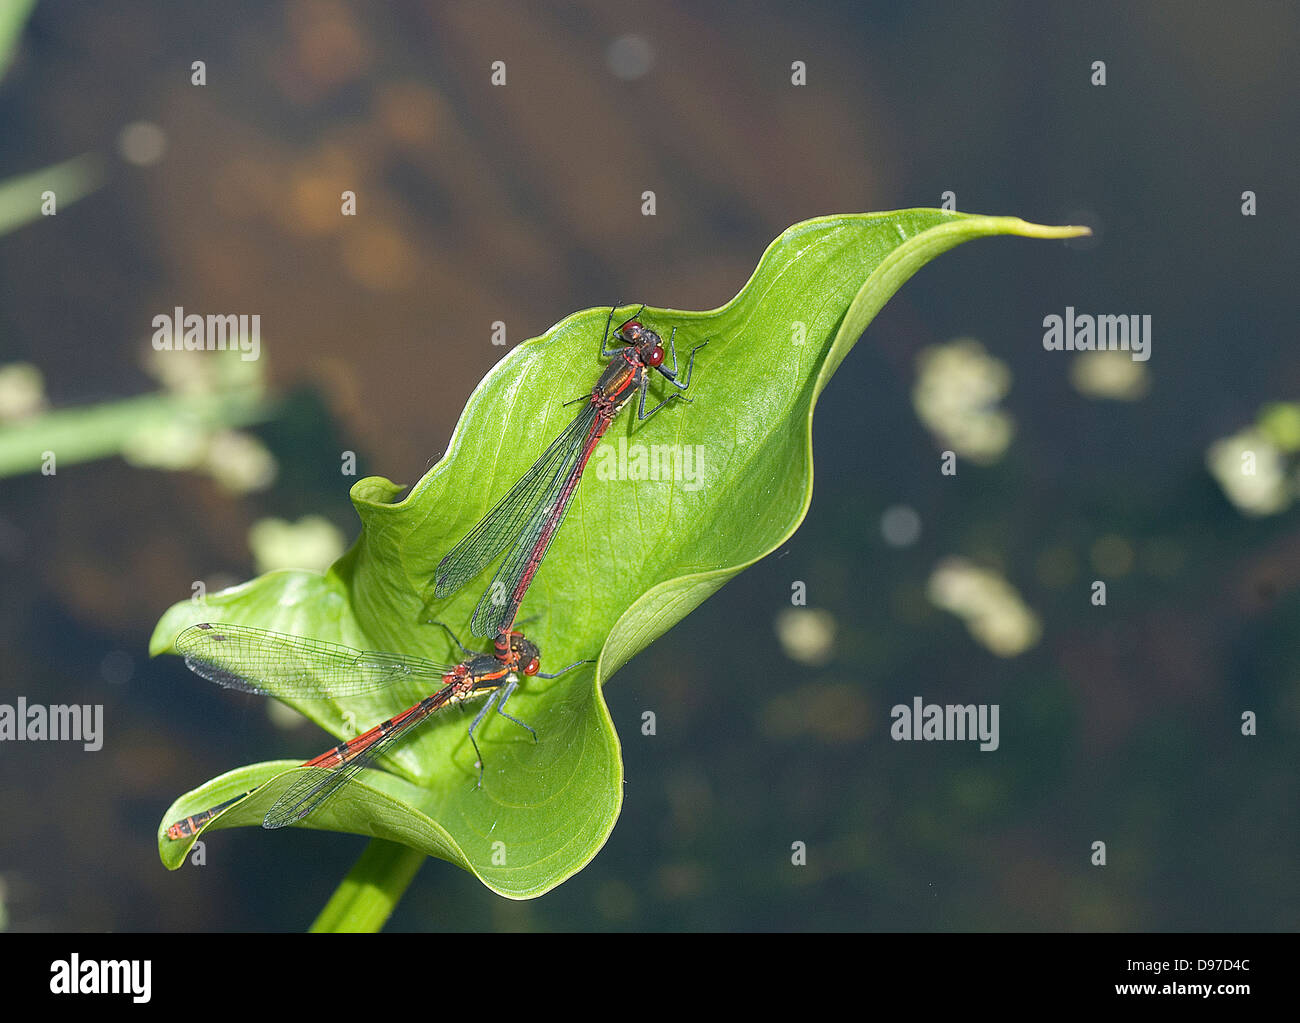 Large red damsel flies mating in UK garden pond Stock Photo